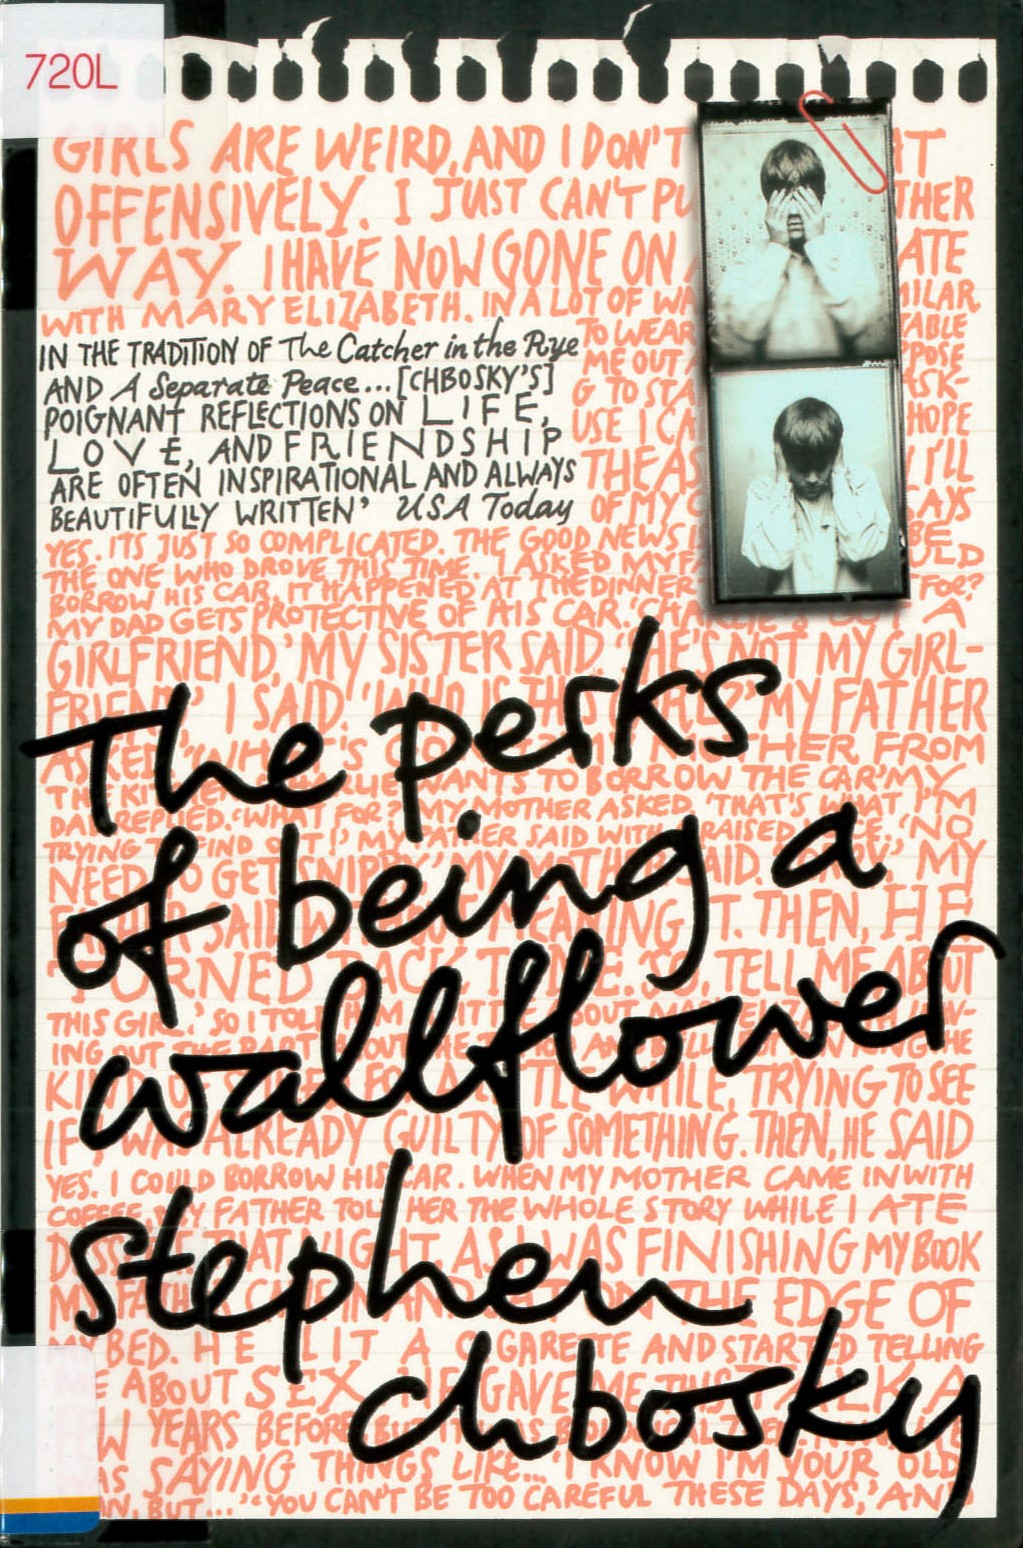 The perks of being a wallflower /